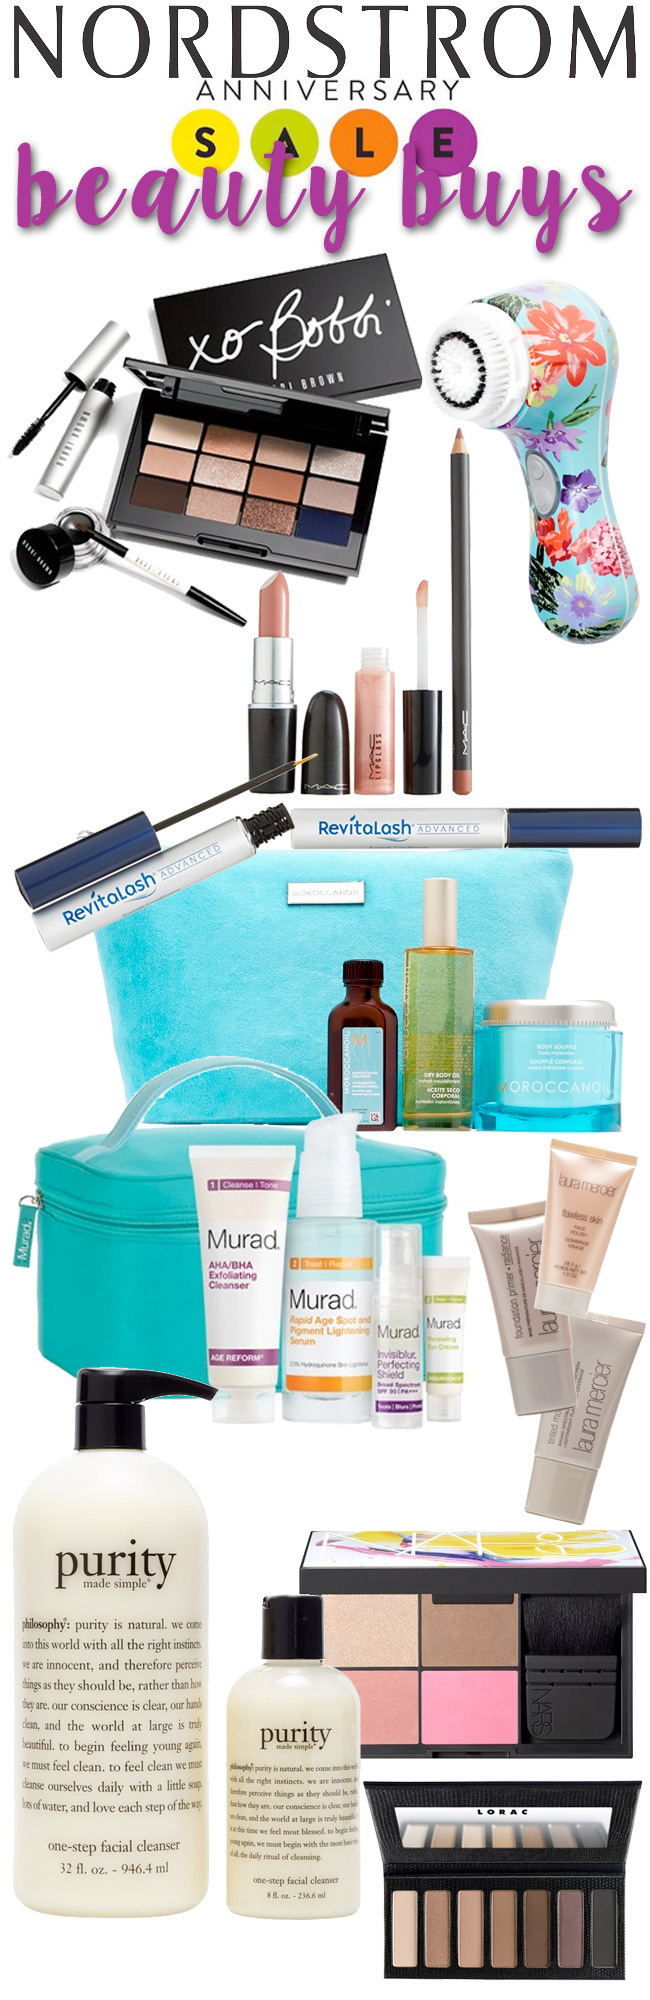 Top 10 Nordstrom Anniversary Beauty Buys